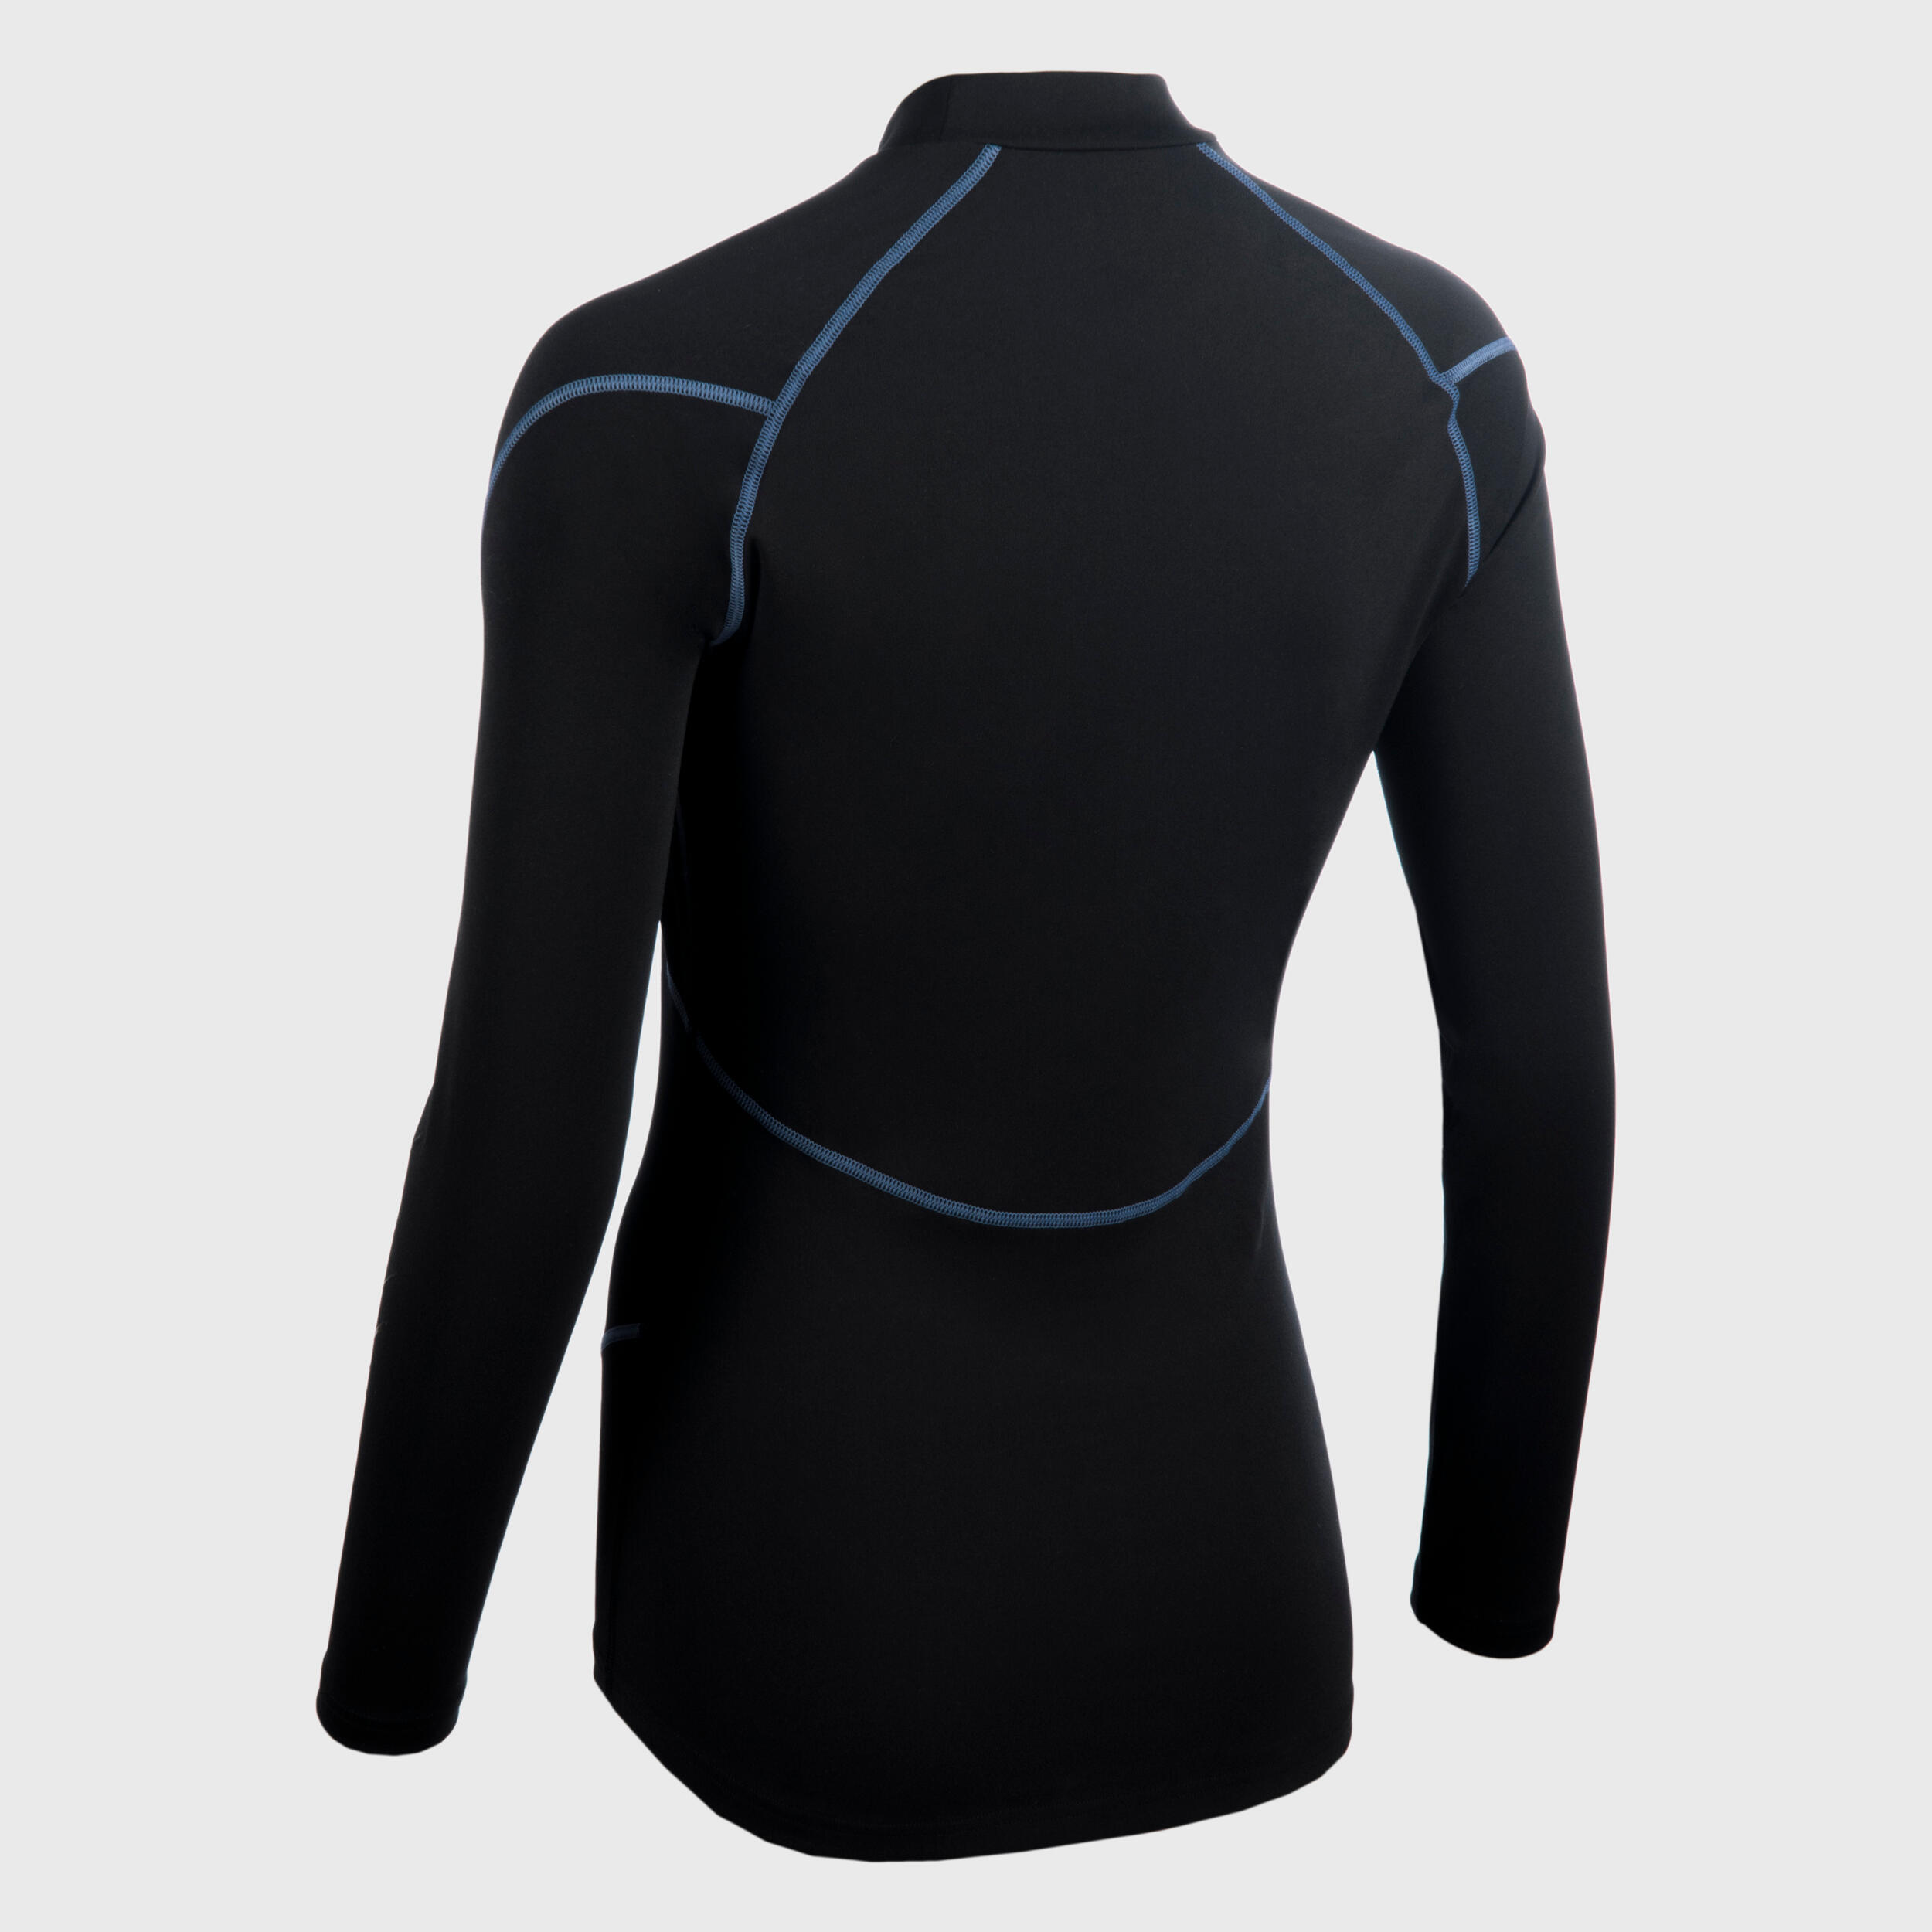 Women's Long-Sleeved Rugby Base Layer 500 - Black/Stormy Blue 2/4